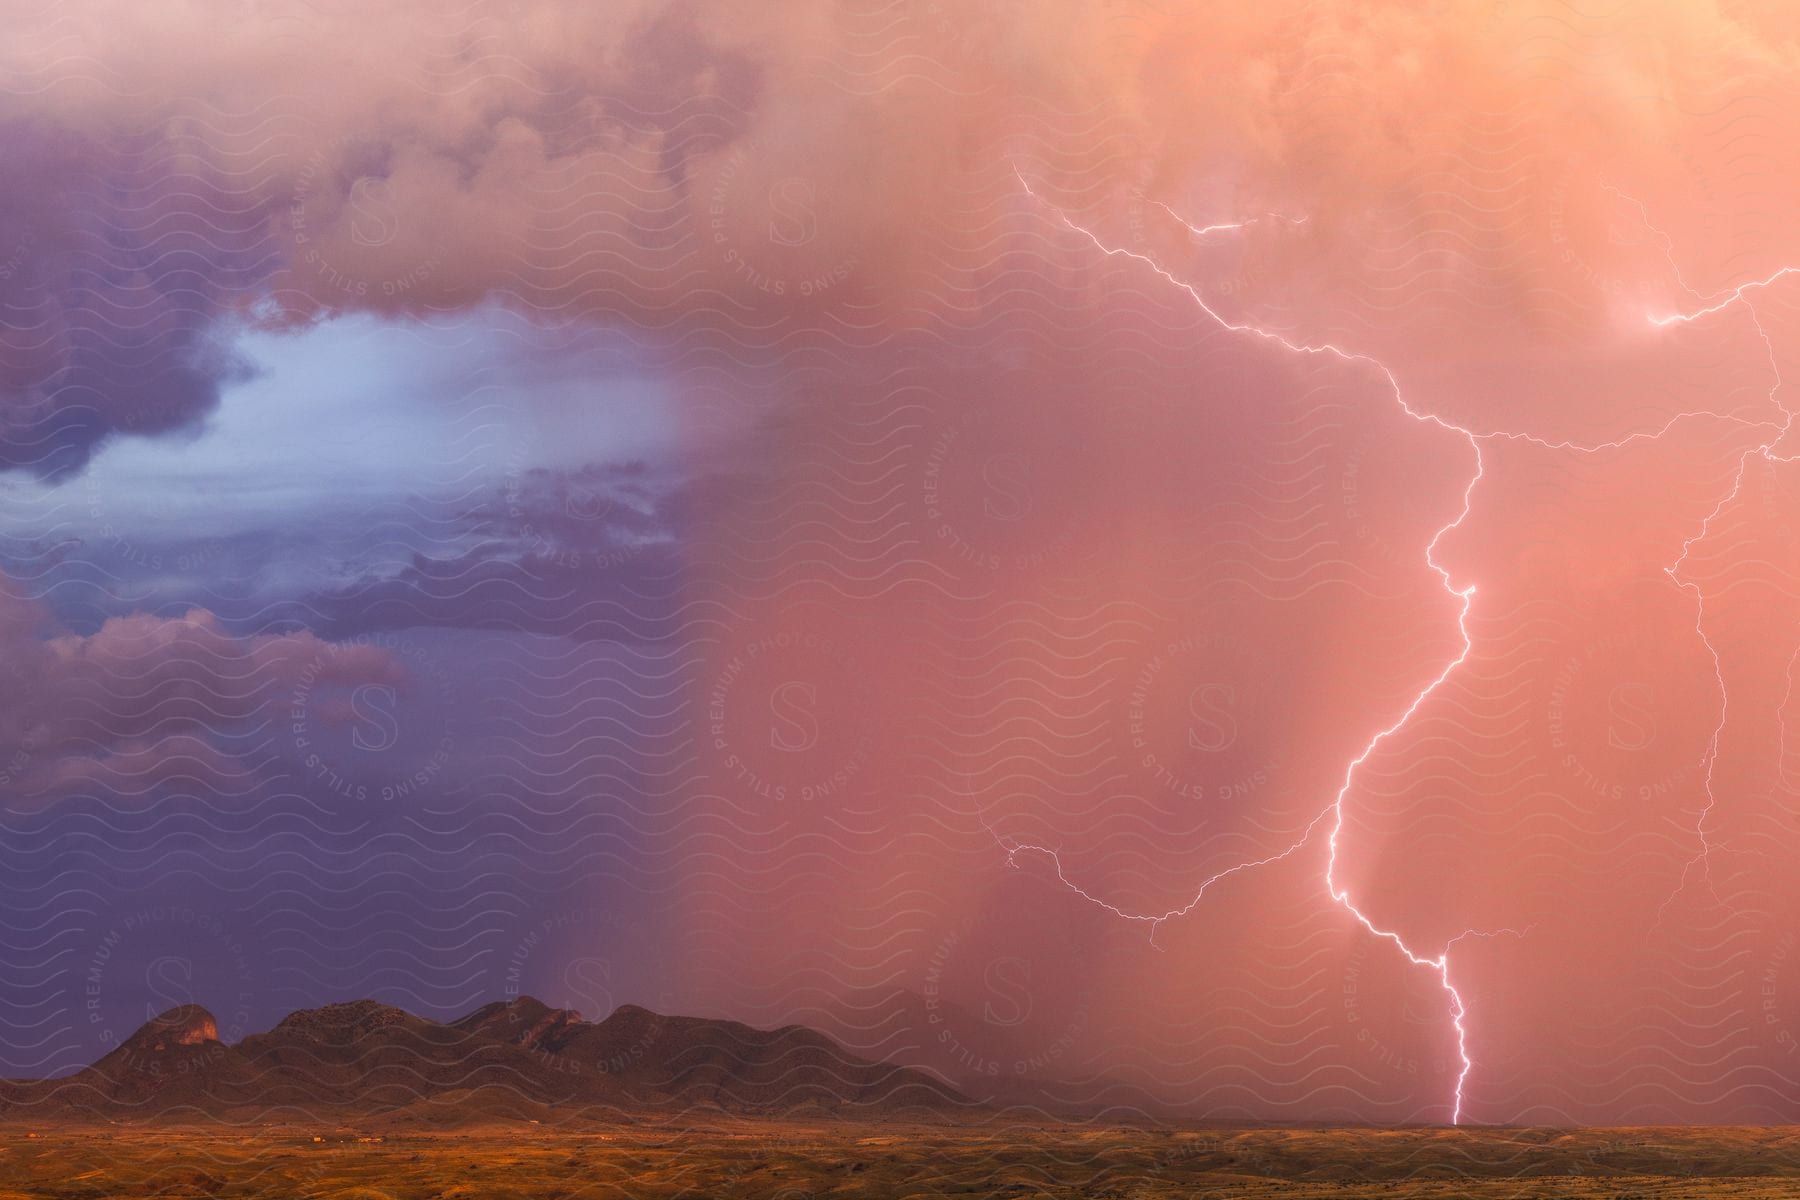 Rain falls from storm clouds over the mountains in the plains as lightning strikes along the lower slopes at sunset